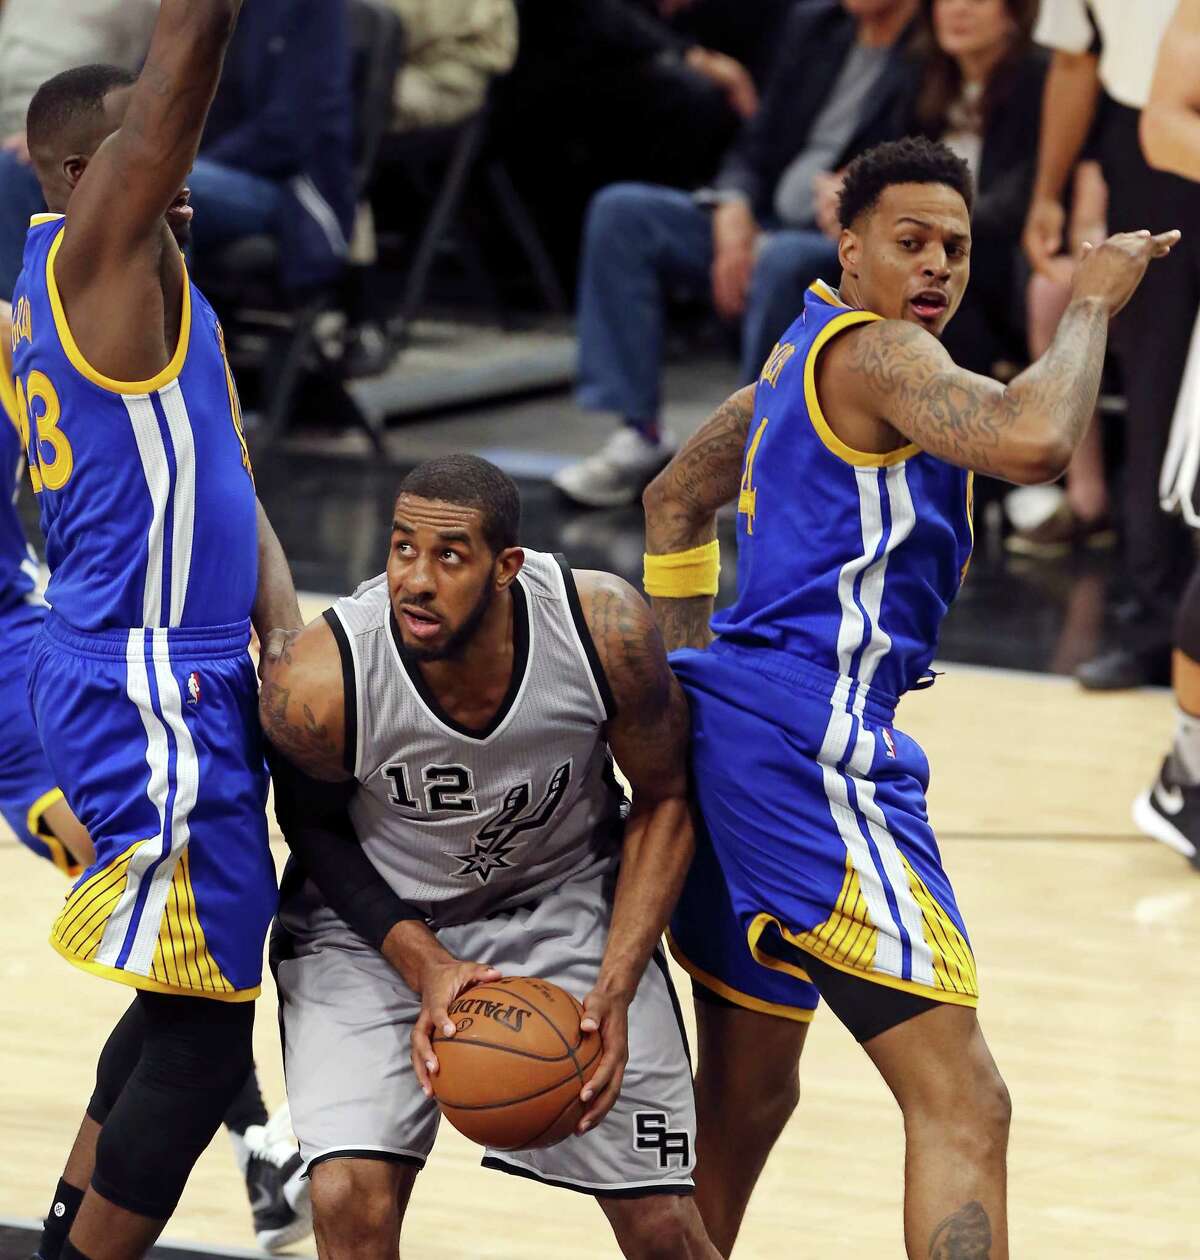 San Antonio Spurs' LaMarcus Aldridge looks for room between Golden State Warriors' Draymond Green (left) and Golden State Warriors' Brandon Rush during first half action Saturday March 19, 2016 at the AT&T Center.